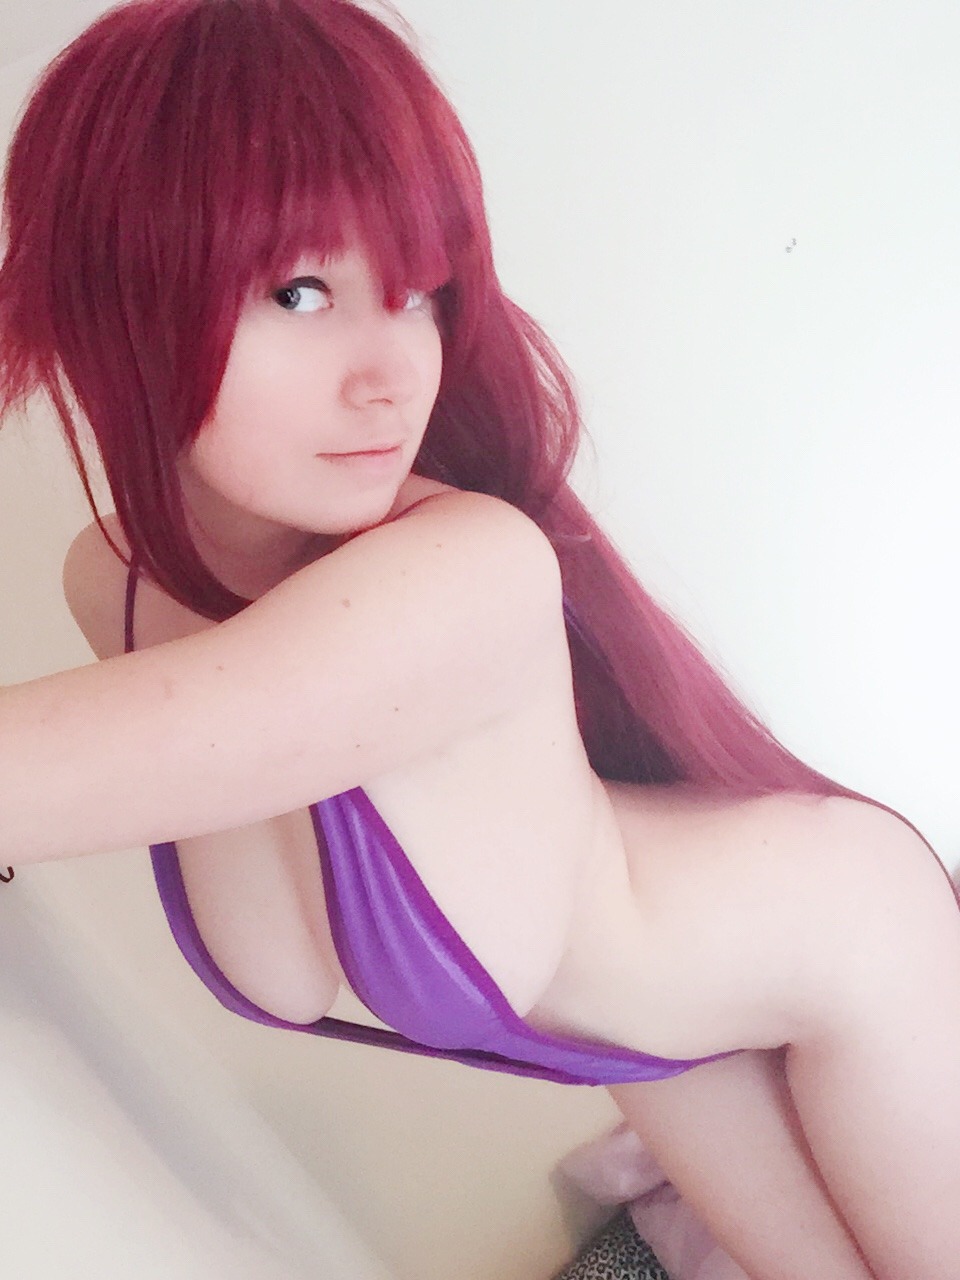 usatame:  Happy Thong Thursday with some Rias test photos ❤️❤️❤️ still